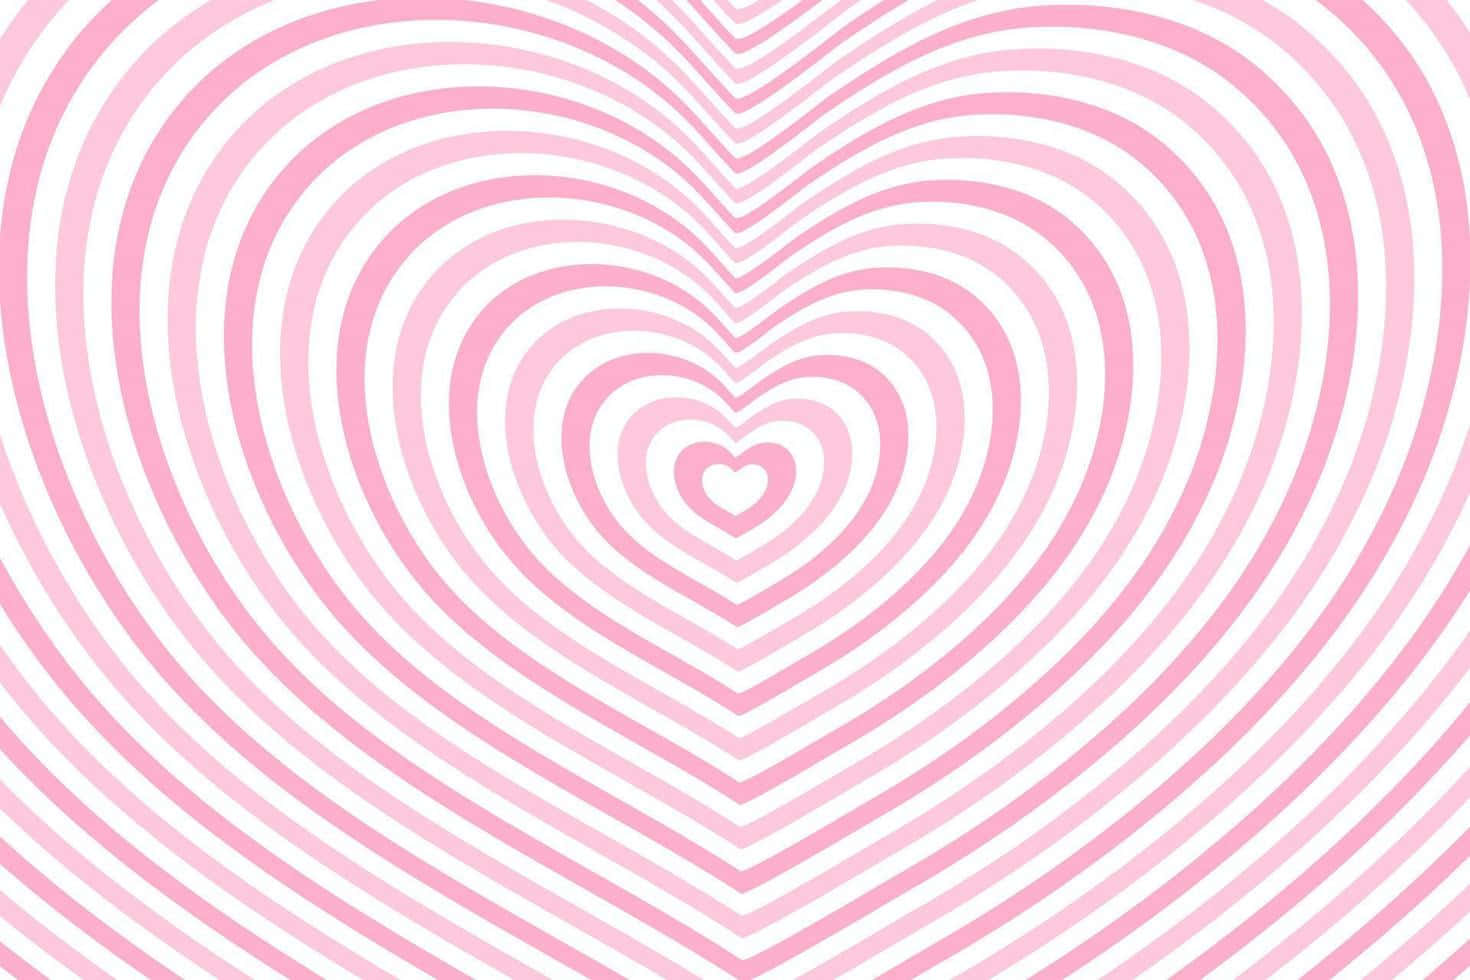 Concentric Pink Hearts Pattern Wallpaper